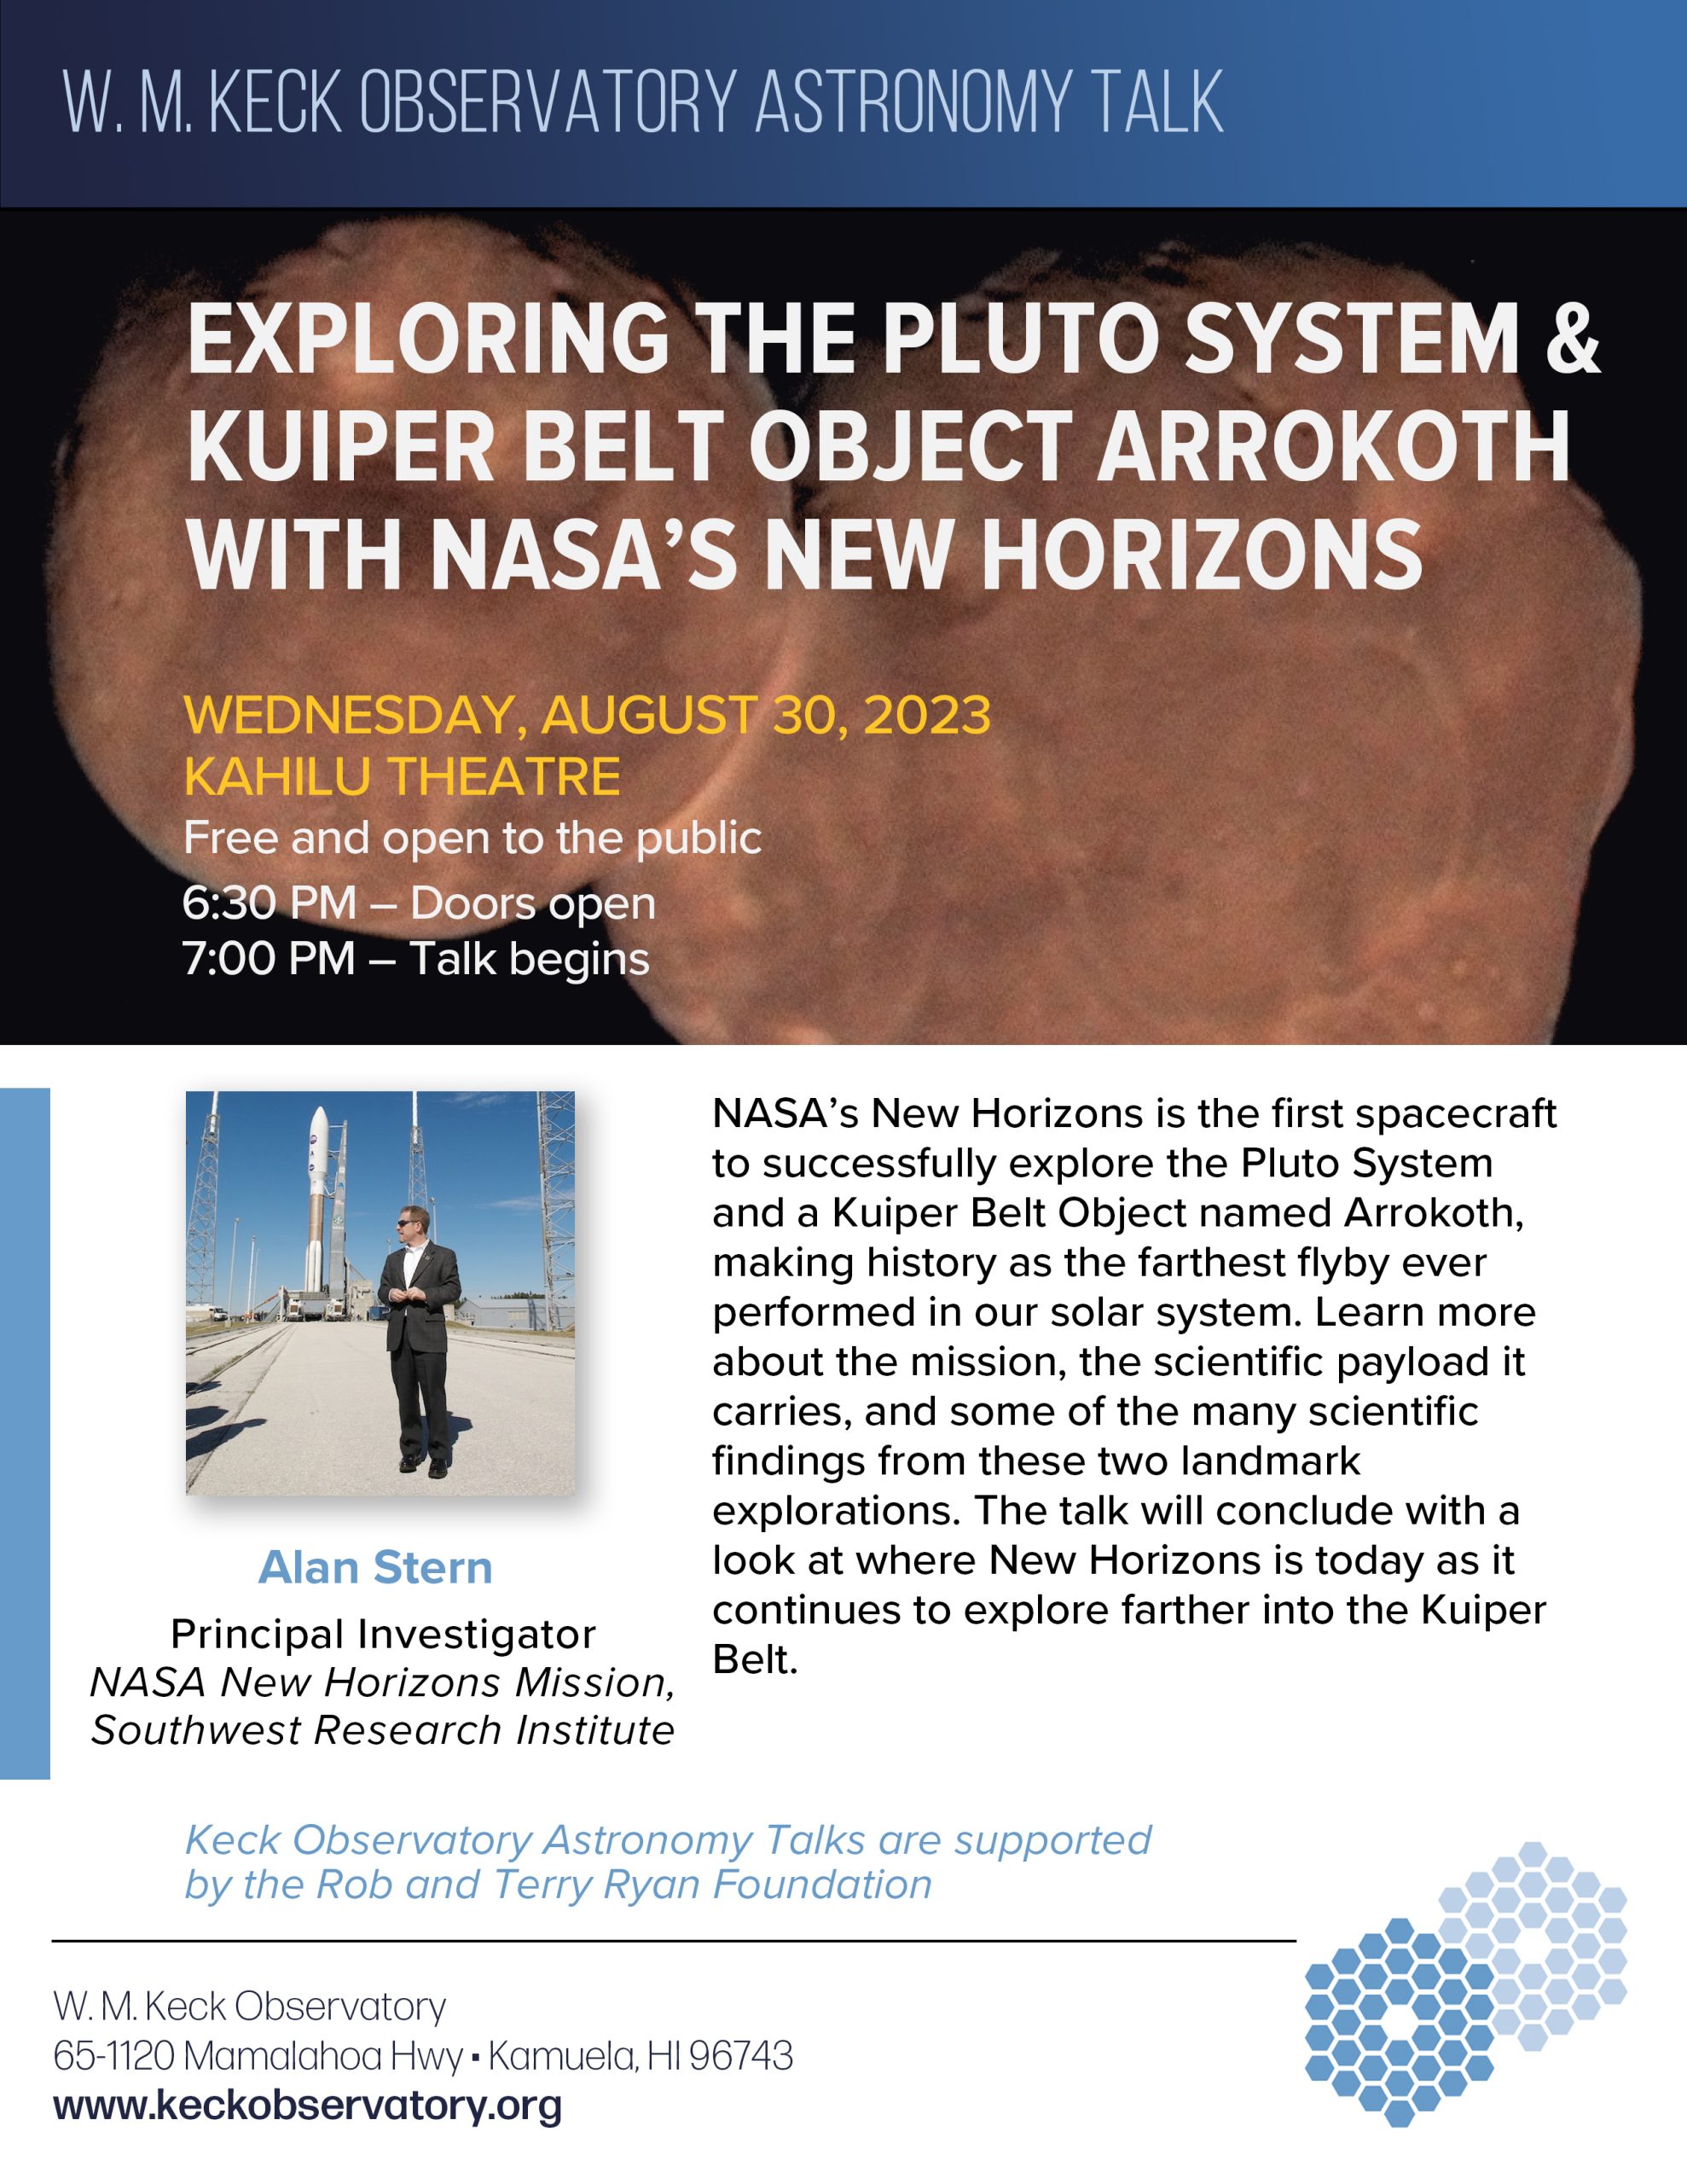 Exploring Pluto System & Kuiper Belt Object Arrokoth with NASA's New Horizons. 8/30/2023 at Kahilu Theatre. Free and open to the public. 6:30pm - doors open. 7:00pm - Talk beings